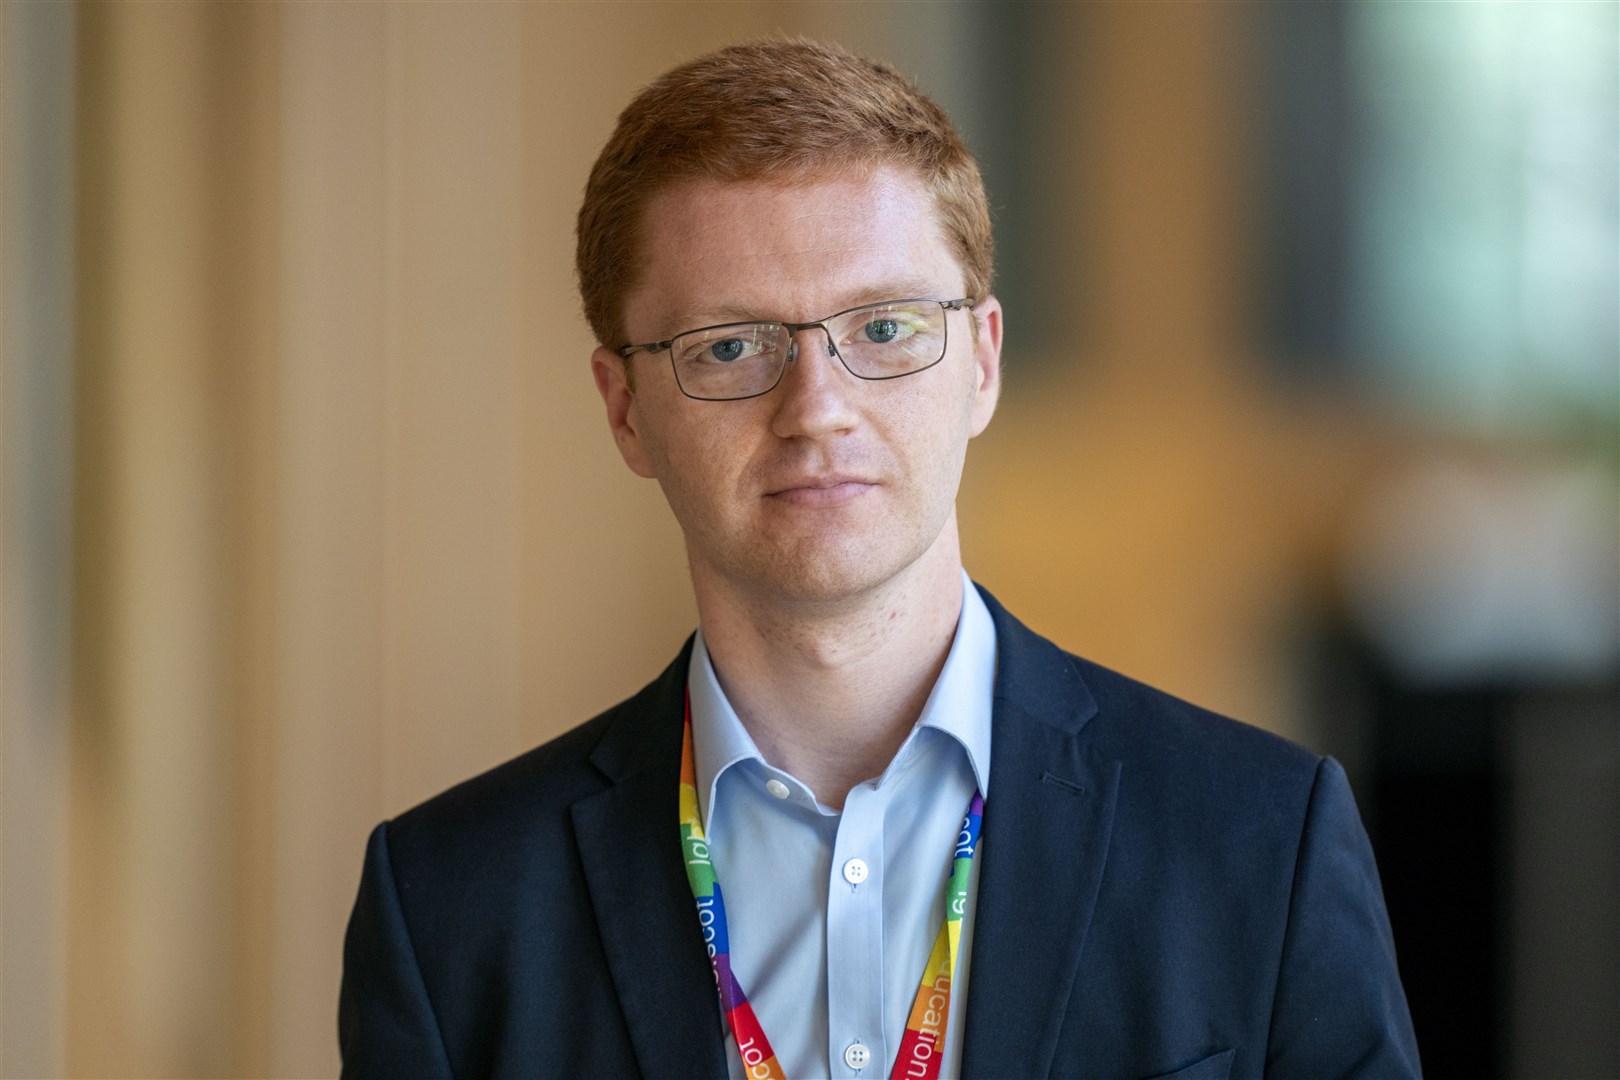 Green MSP Ross Greer said his party cannot support the appointment of ‘someone who believes that equal marriage is wrong’ (PA)